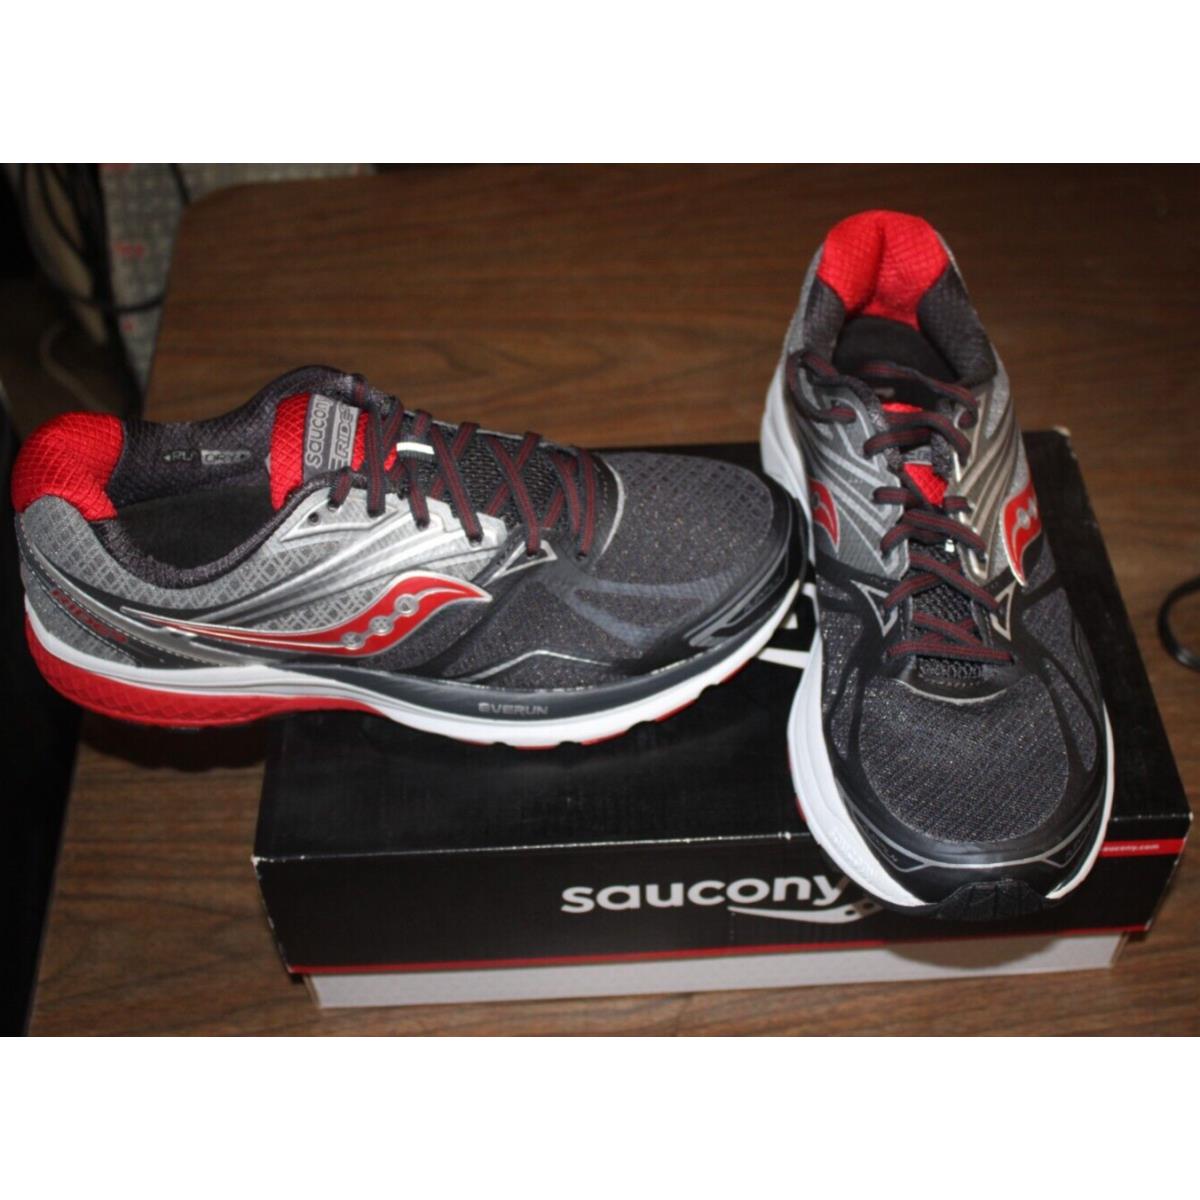 Saucony Ride 9 Running Shoes S201318-1 Mens Size 8.5 Gray/red